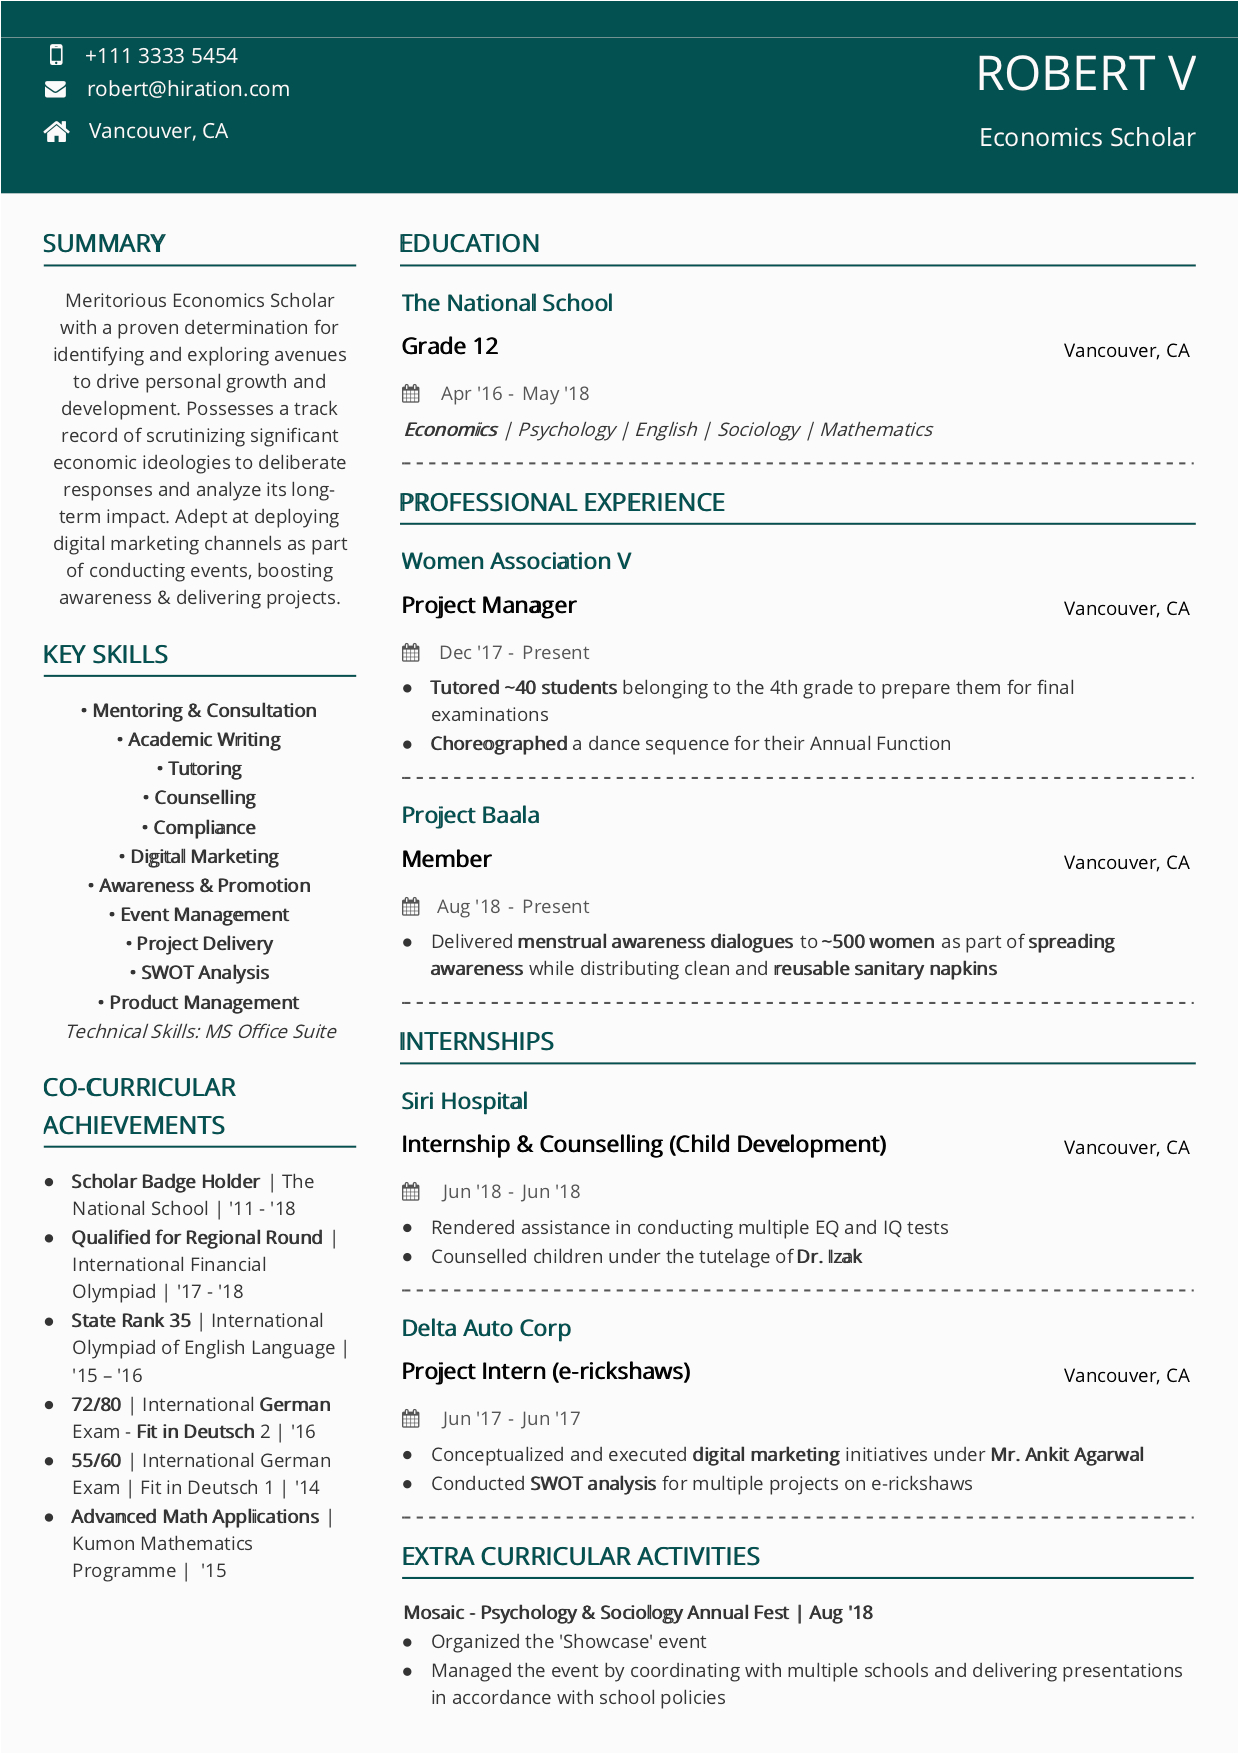 Resume for College Scholarship Application Template Scholarship Resume [2020 Guide with Scholarship Examples